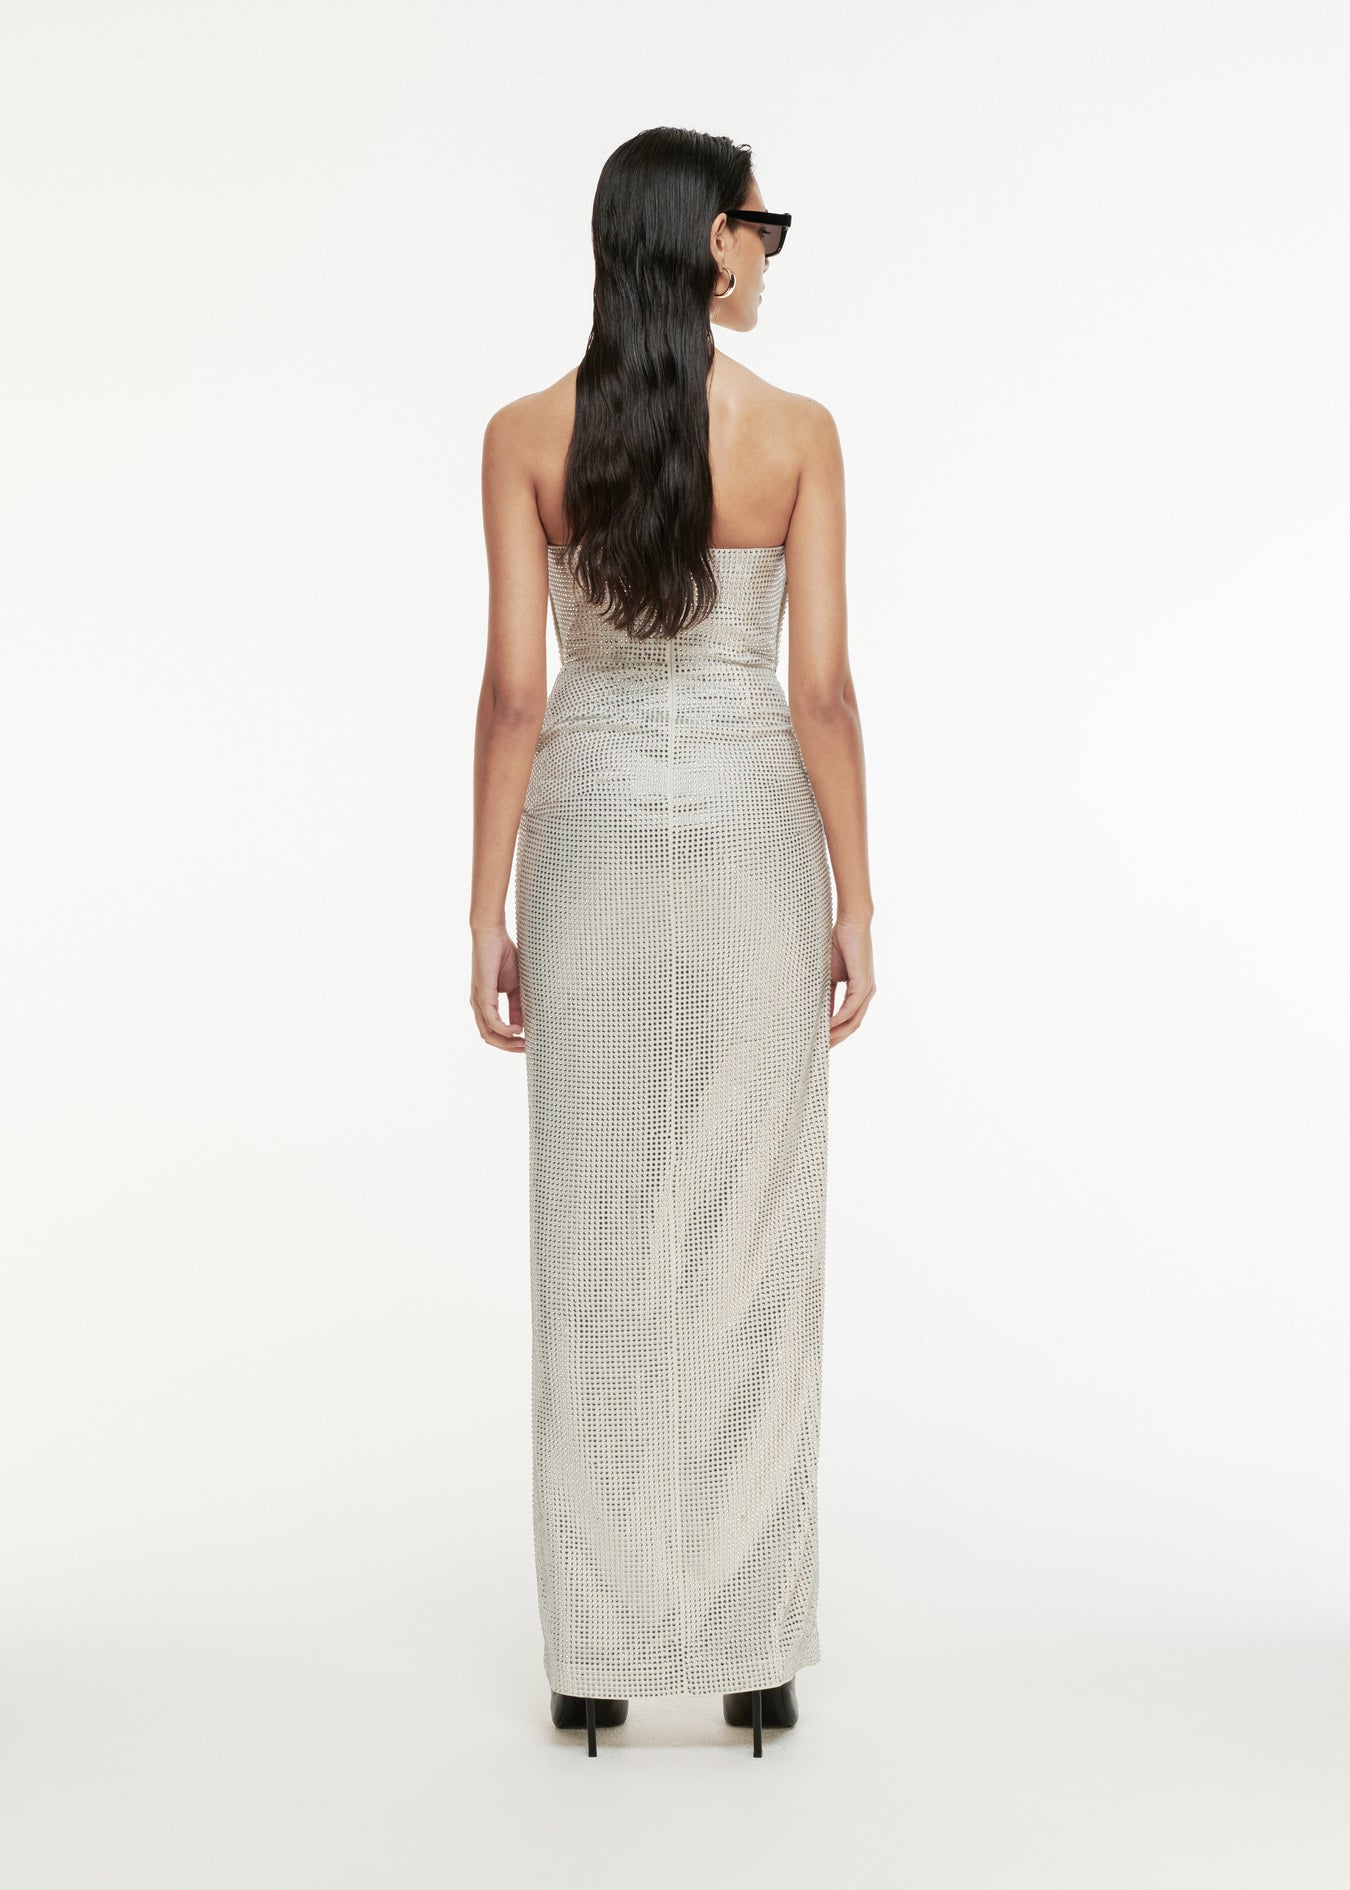 The back of a woman wearing the Asymmetric Diamanté Gown in White